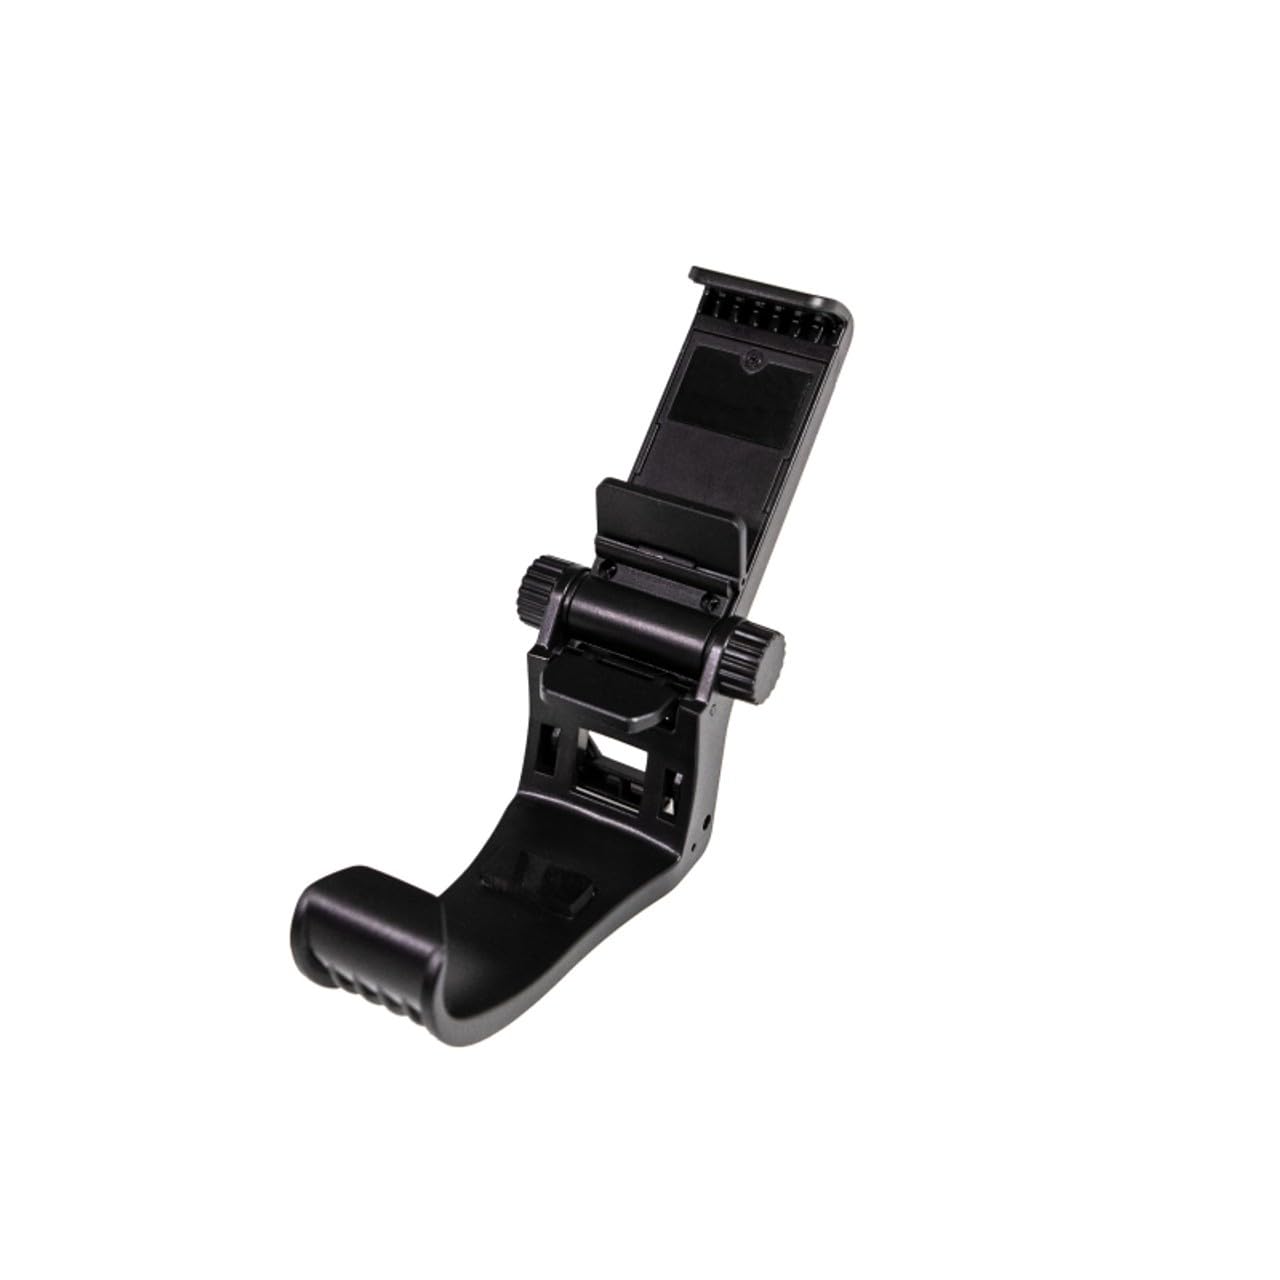 SteelSeries SmartGrip Mobile Phone Holder - Fits Stratus Duo, Stratus XL, and Nimbus - for Phones from 4